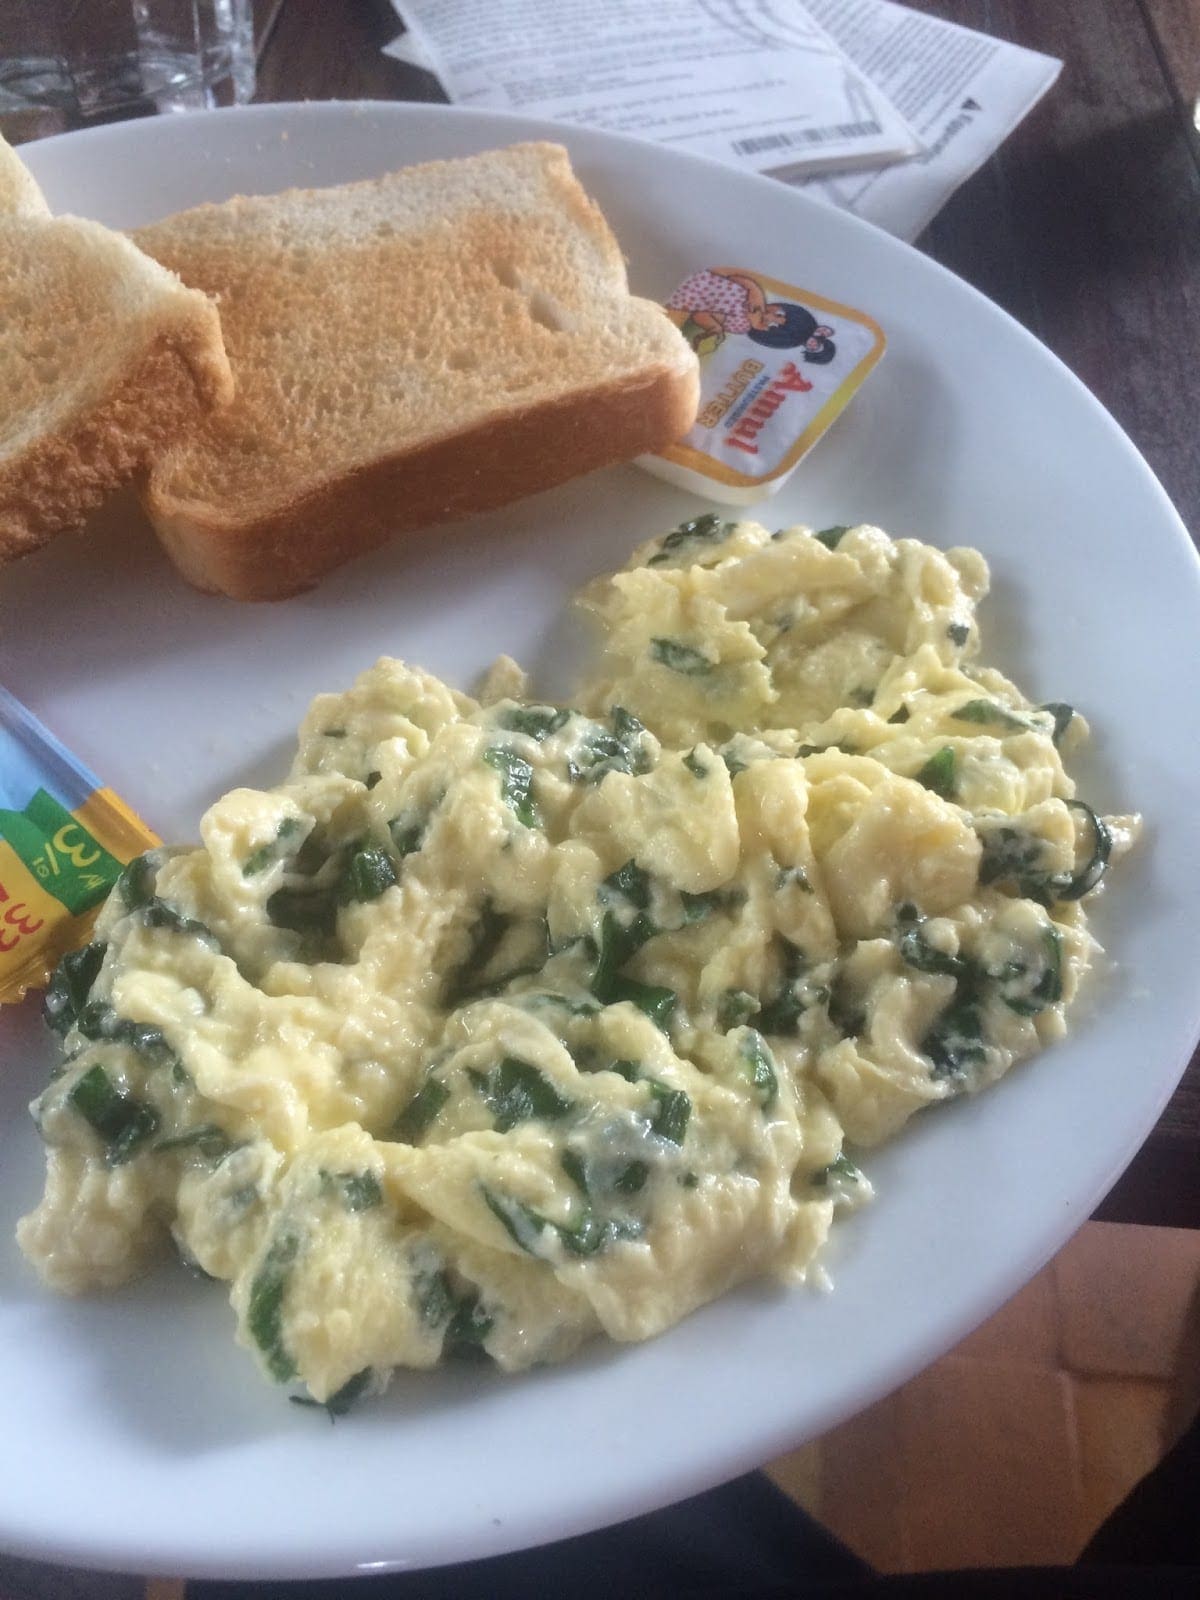 Creamy scrambled eggs with spinach